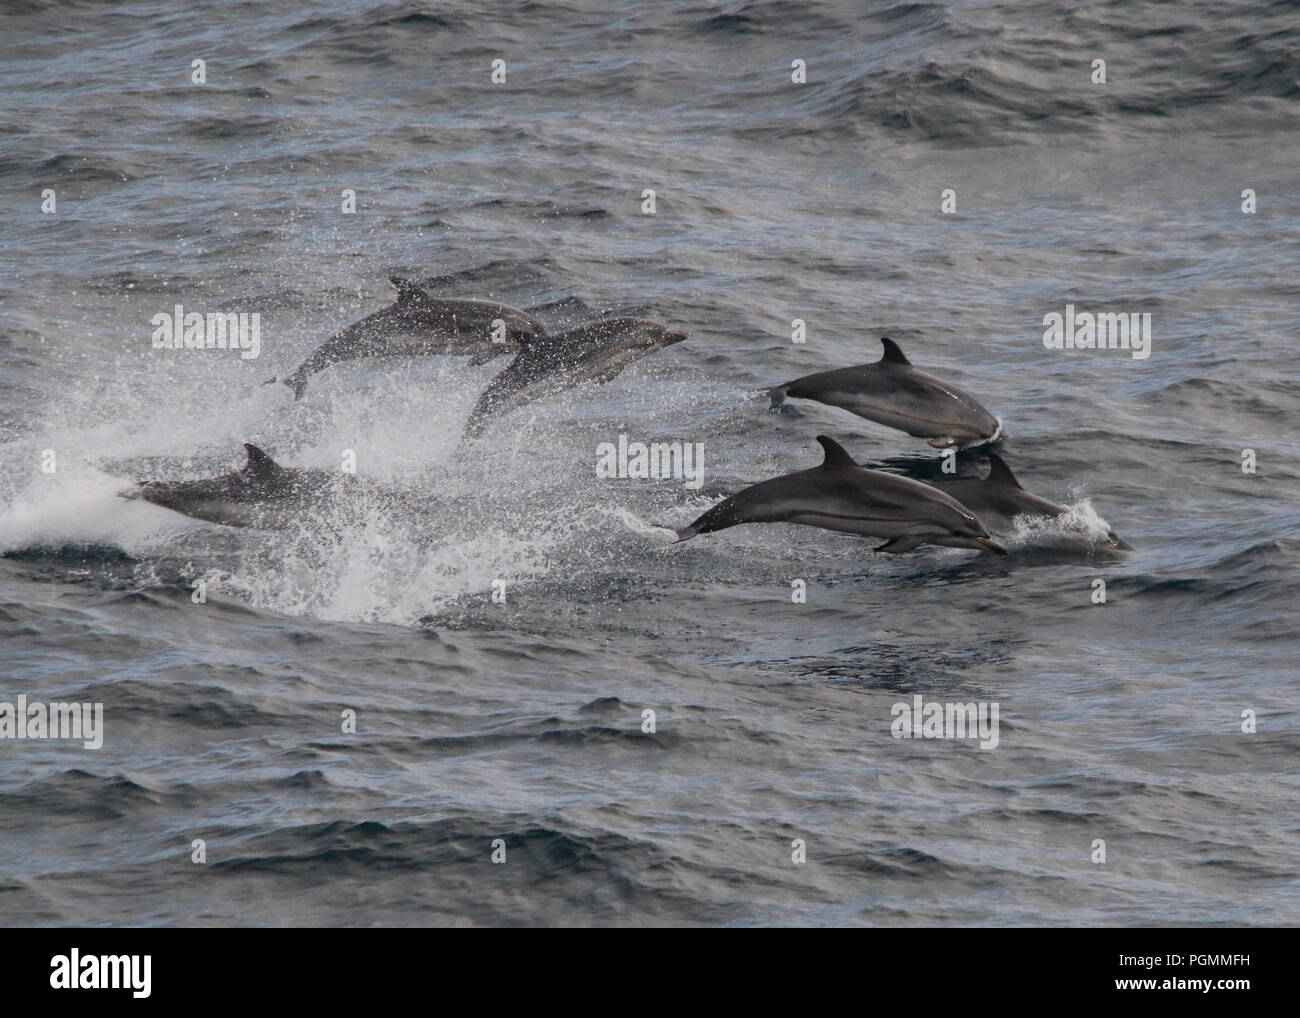 6 wild Dolphins leaping Stock Photo